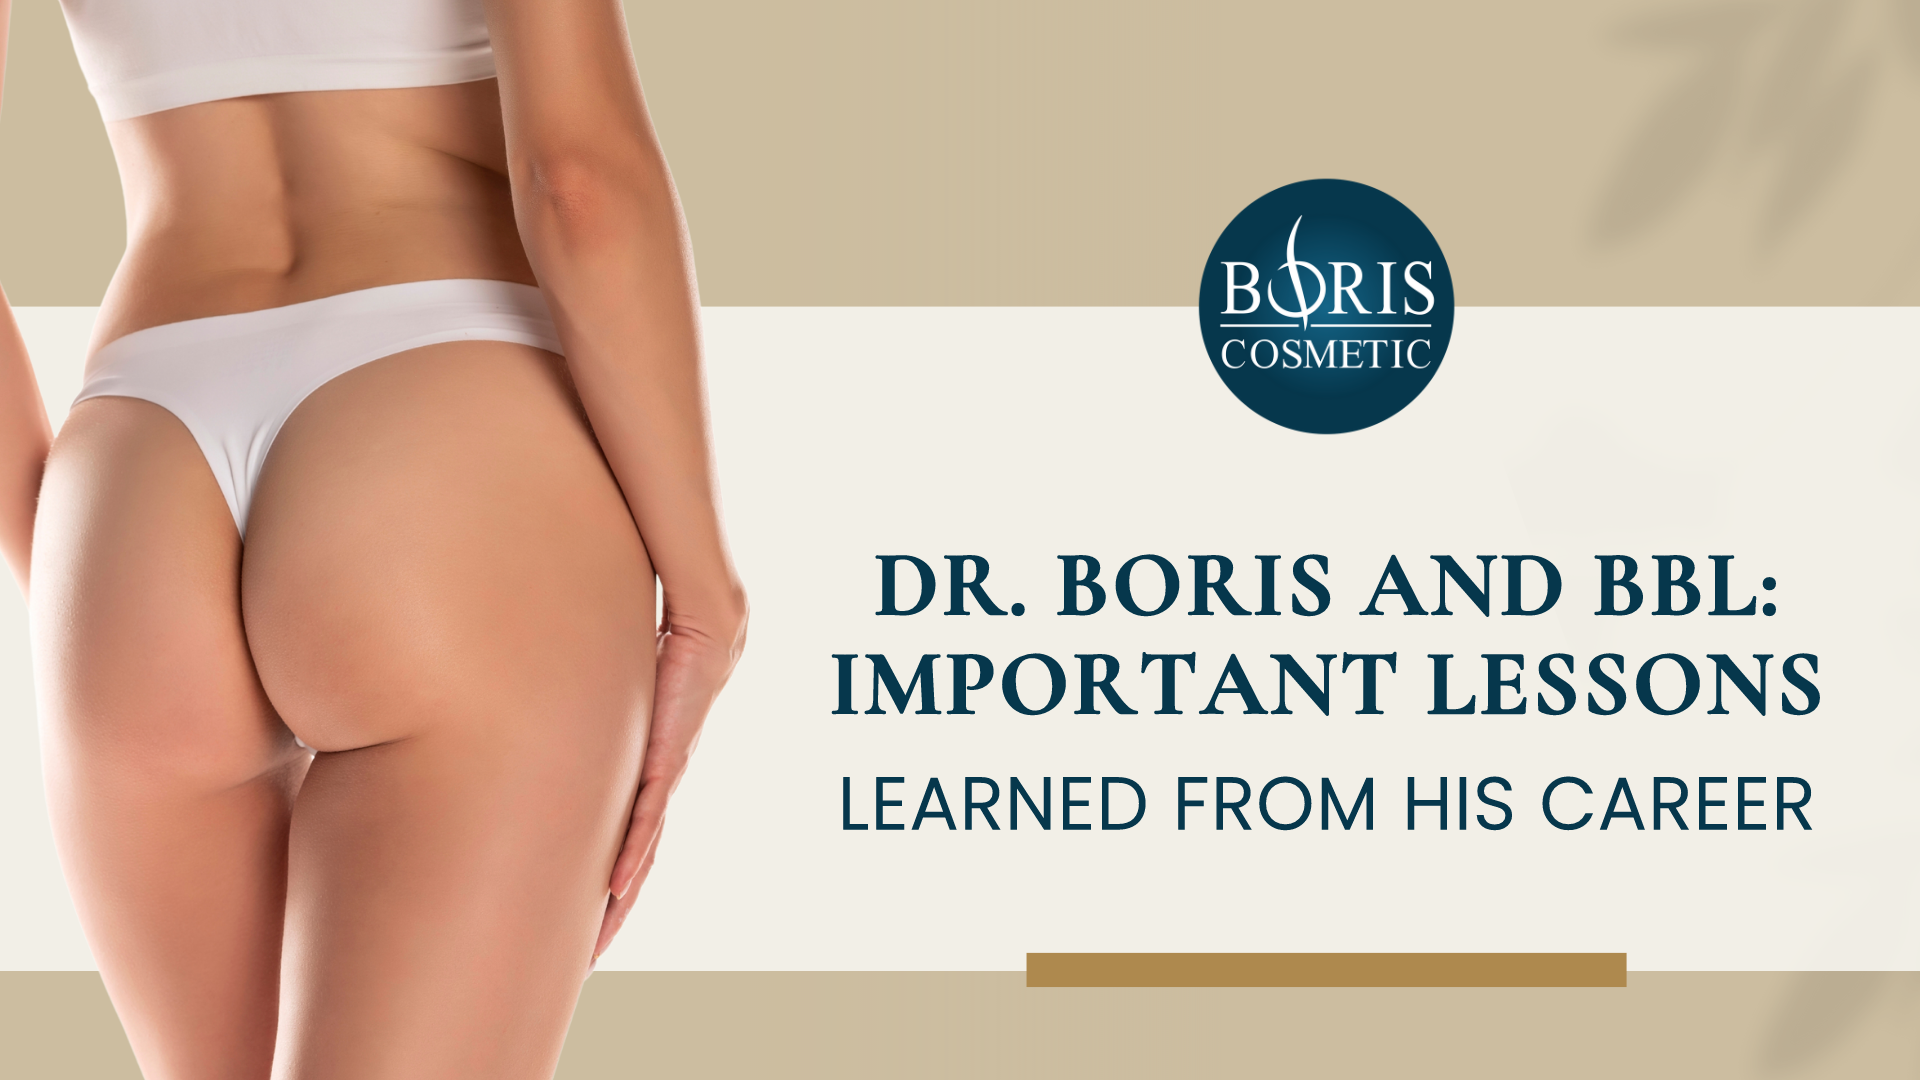 BBL Dr. Boris Important Lessons Learned From Career